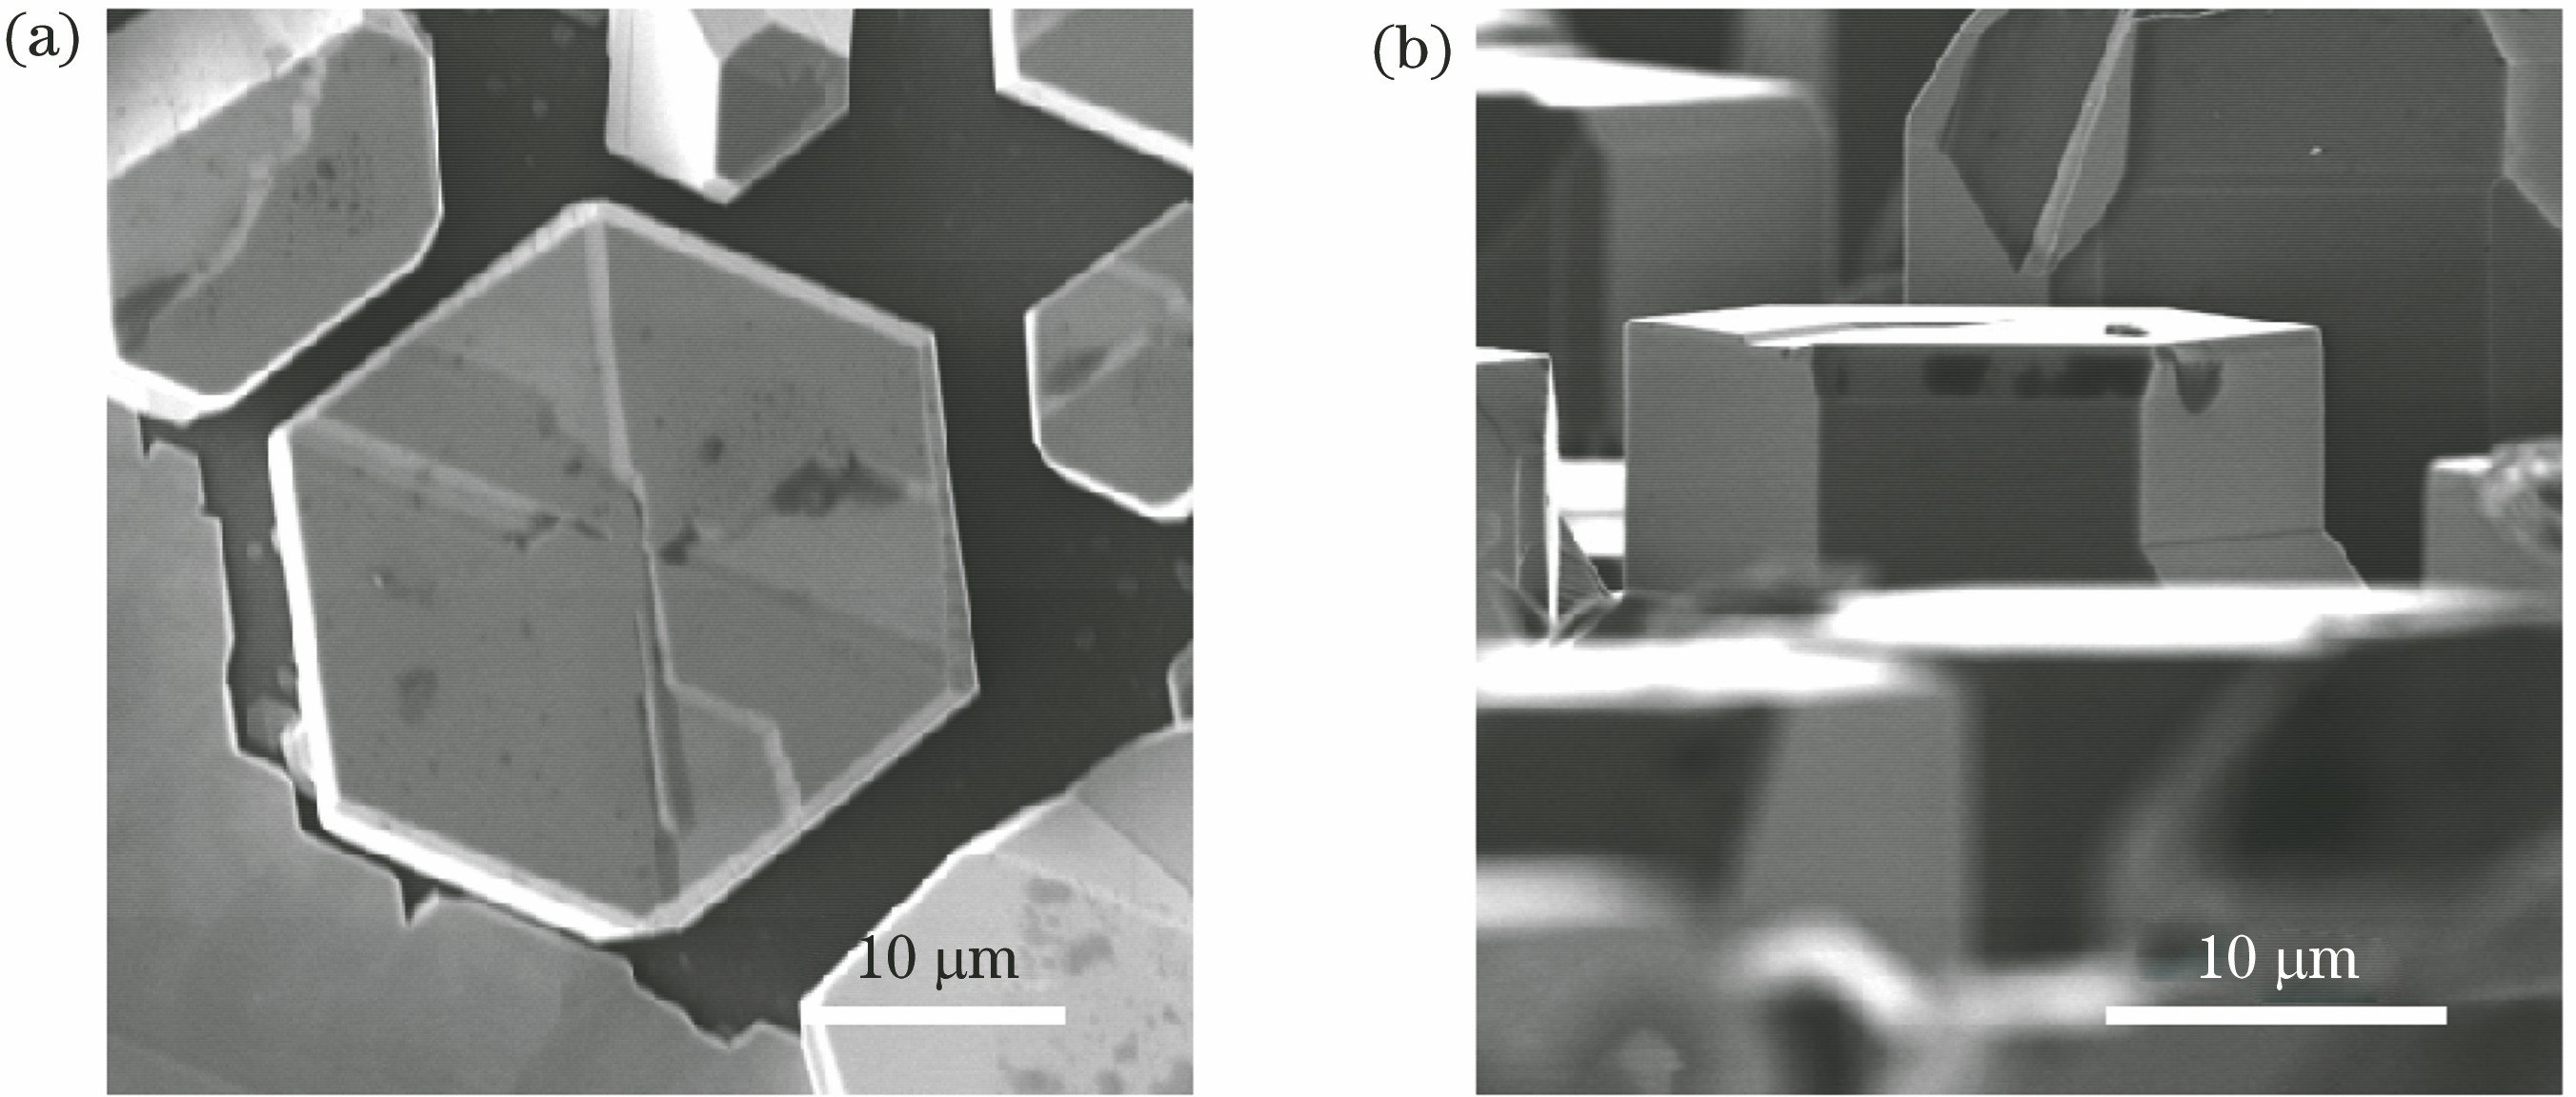 SEM image of GaN microdisk. (a) Top surface; (b) side surface